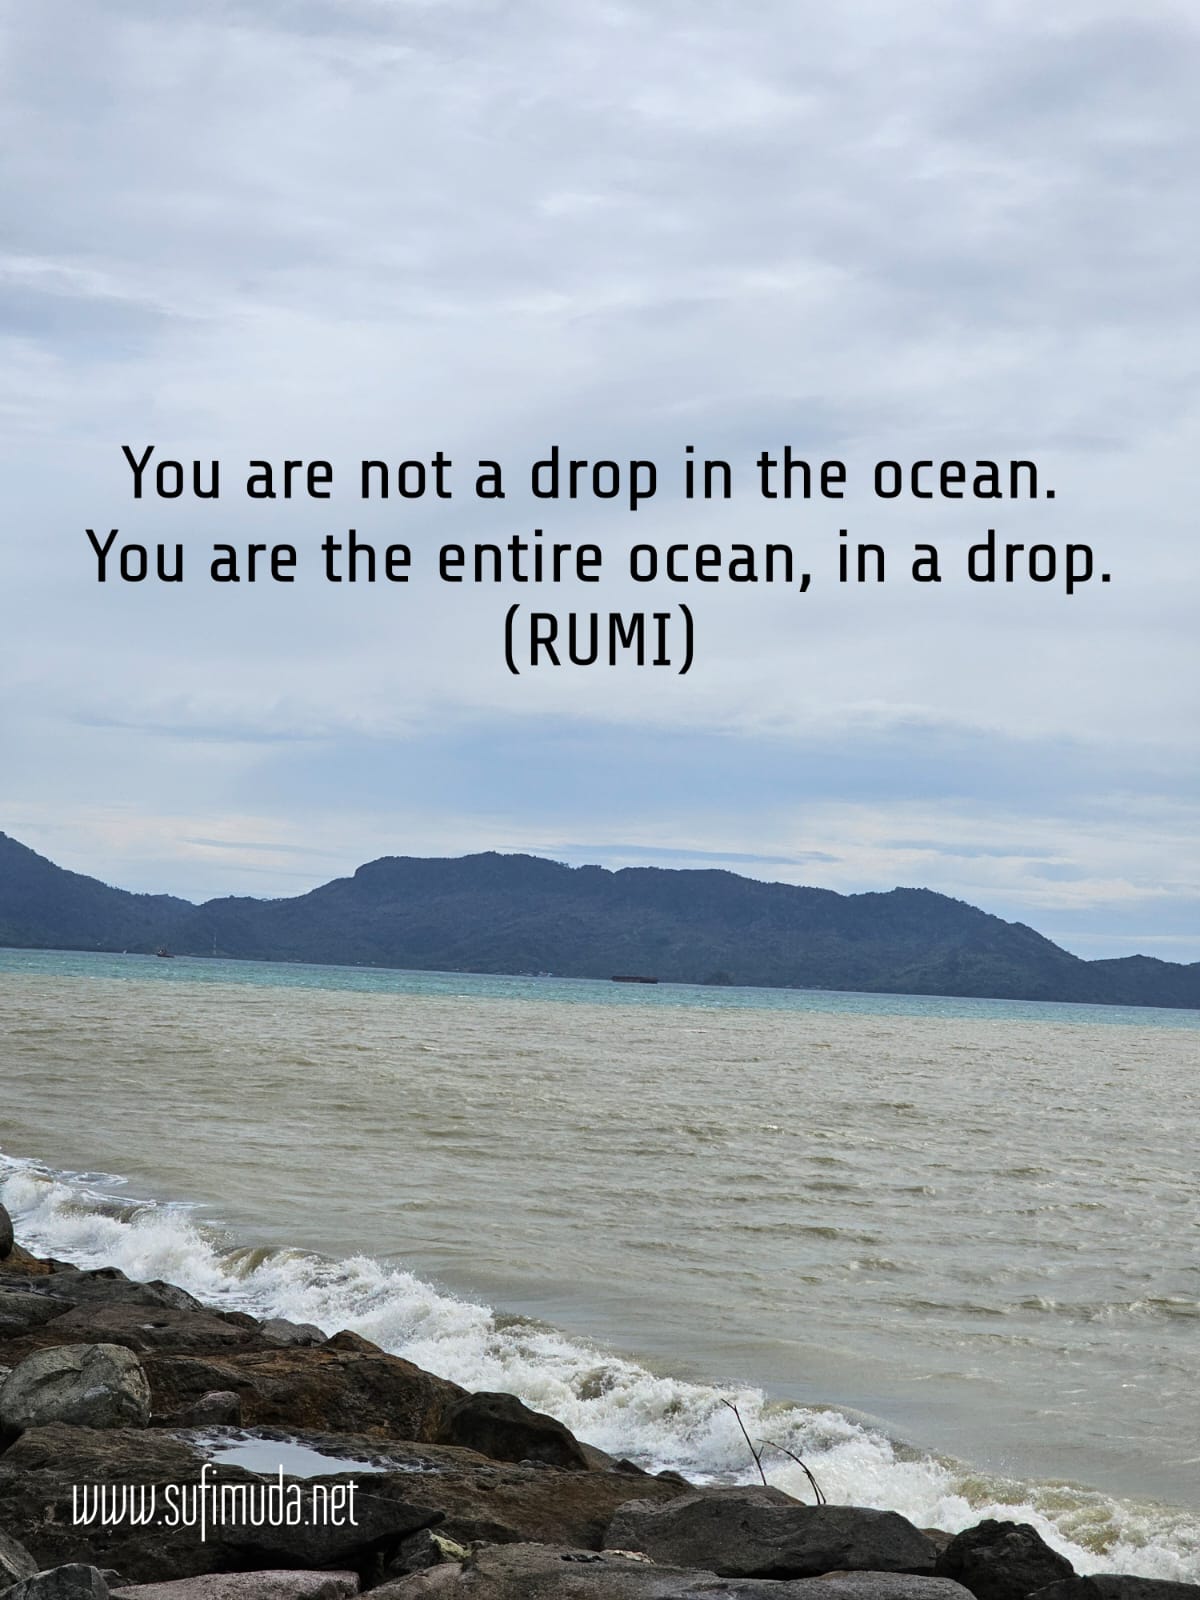 RUMI: “YOU ARE THE ENTIRE OCEAN IN A DROP”